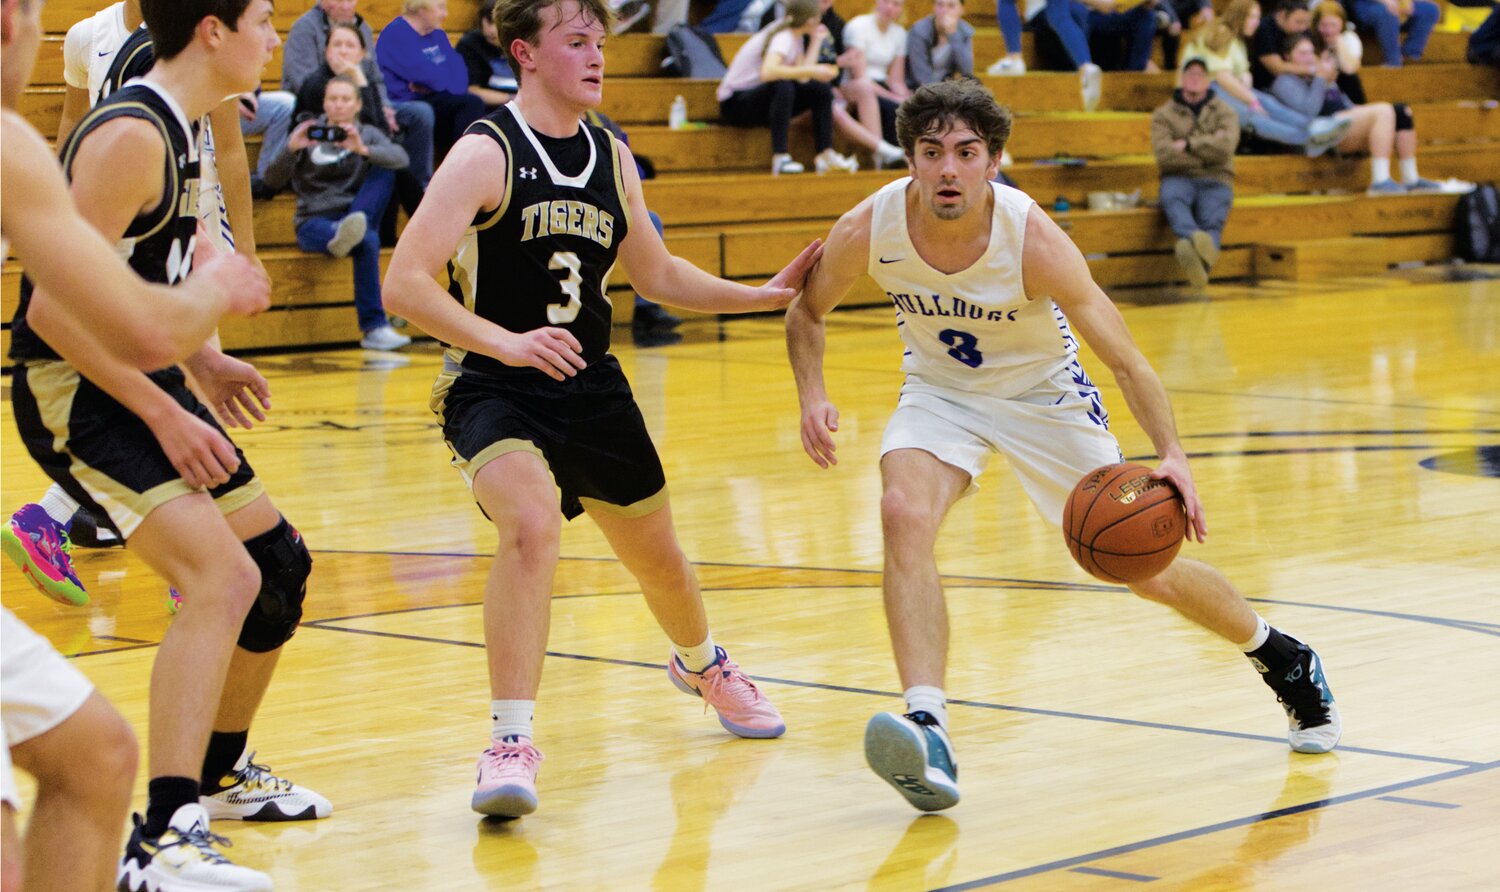 New Franklin senior Jake Marshall charges into the lane.